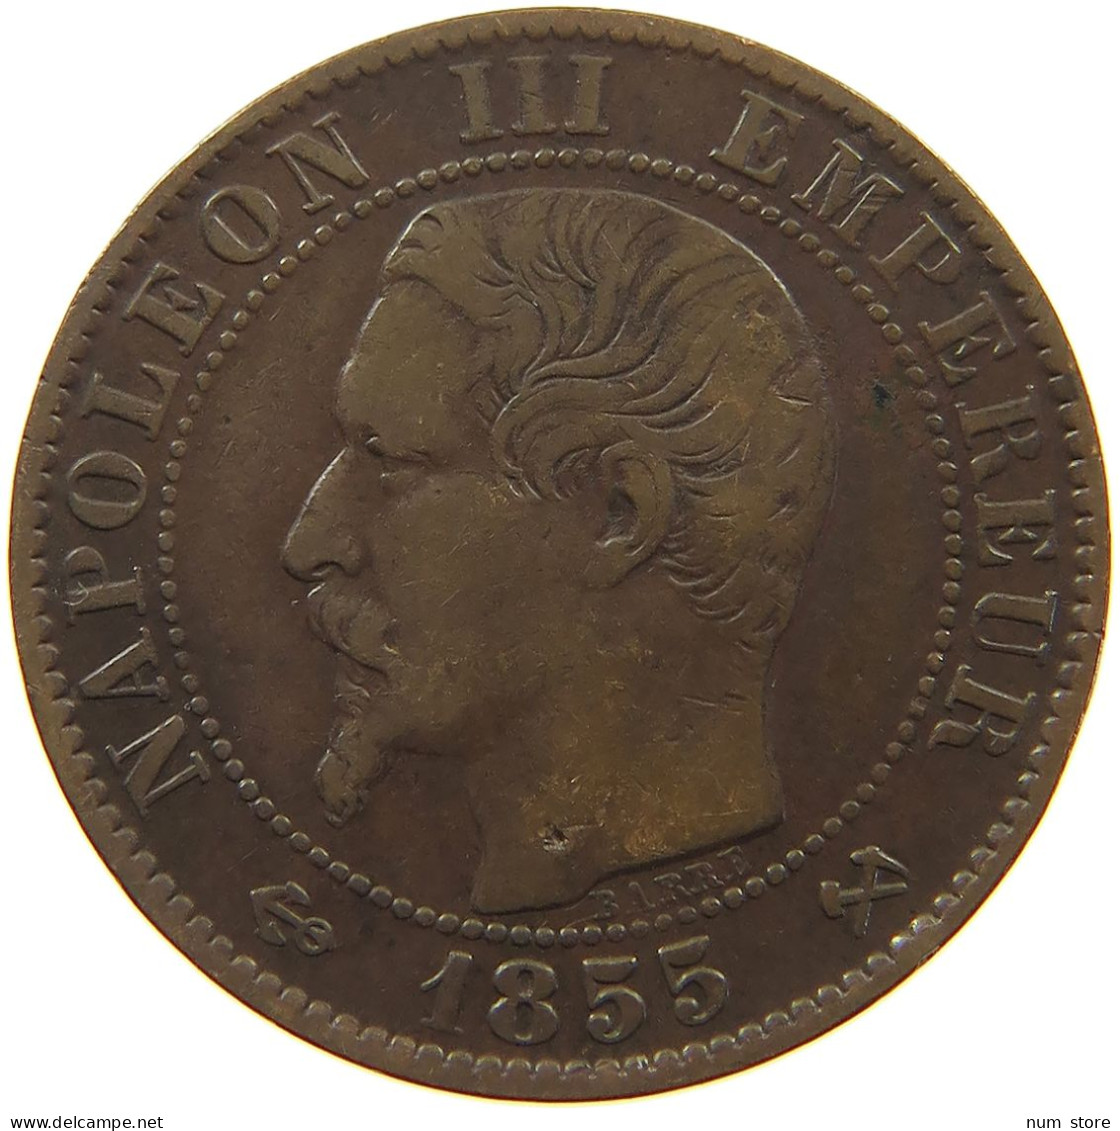 FRANCE 5 CENTIMES 1855 B Napoleon III. (1852-1870) #a059 0211 - 5 Centimes